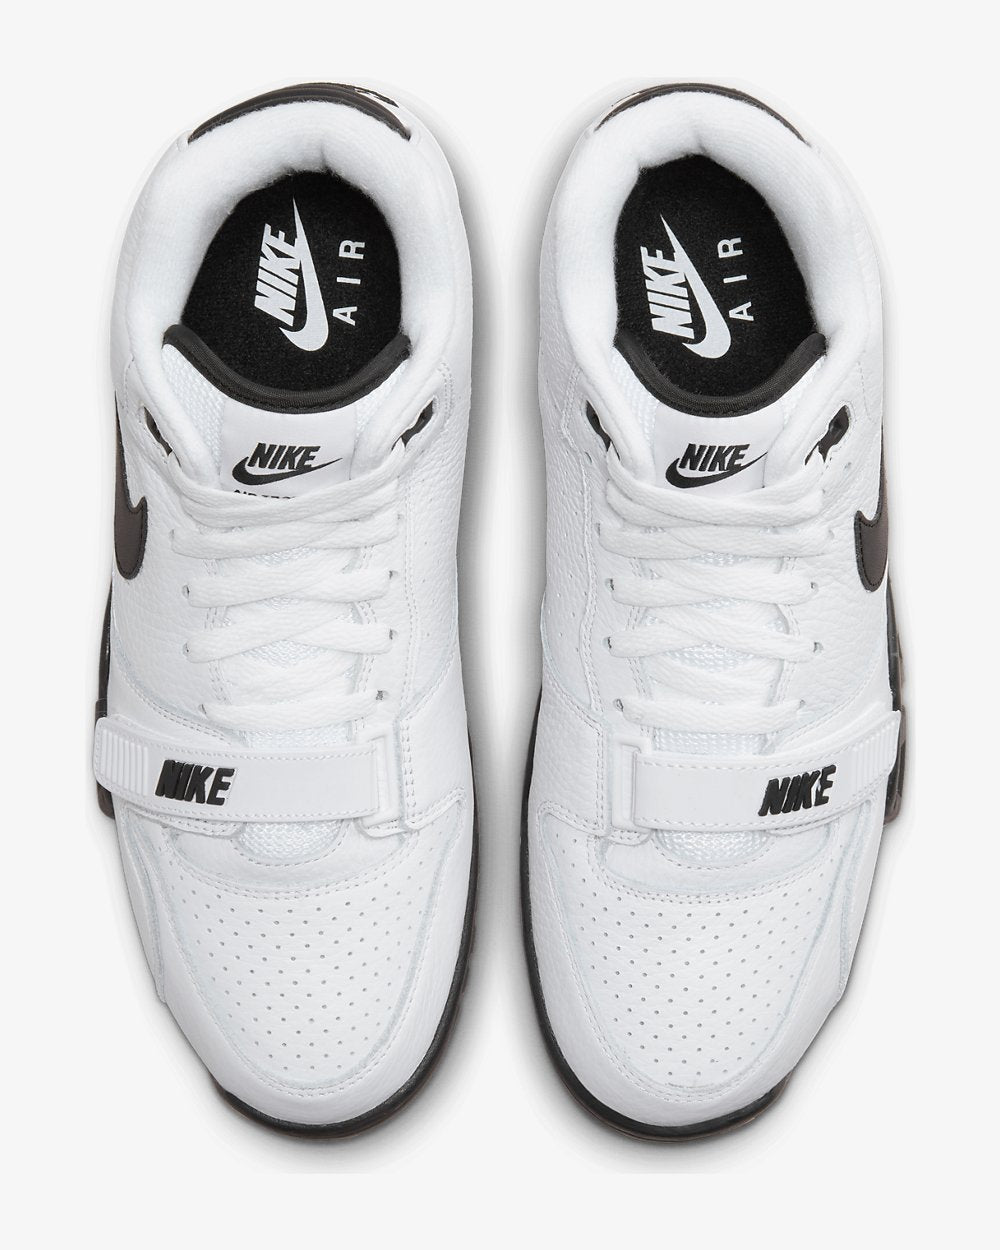 Nike Air Trainer 1 - Men's Shoes